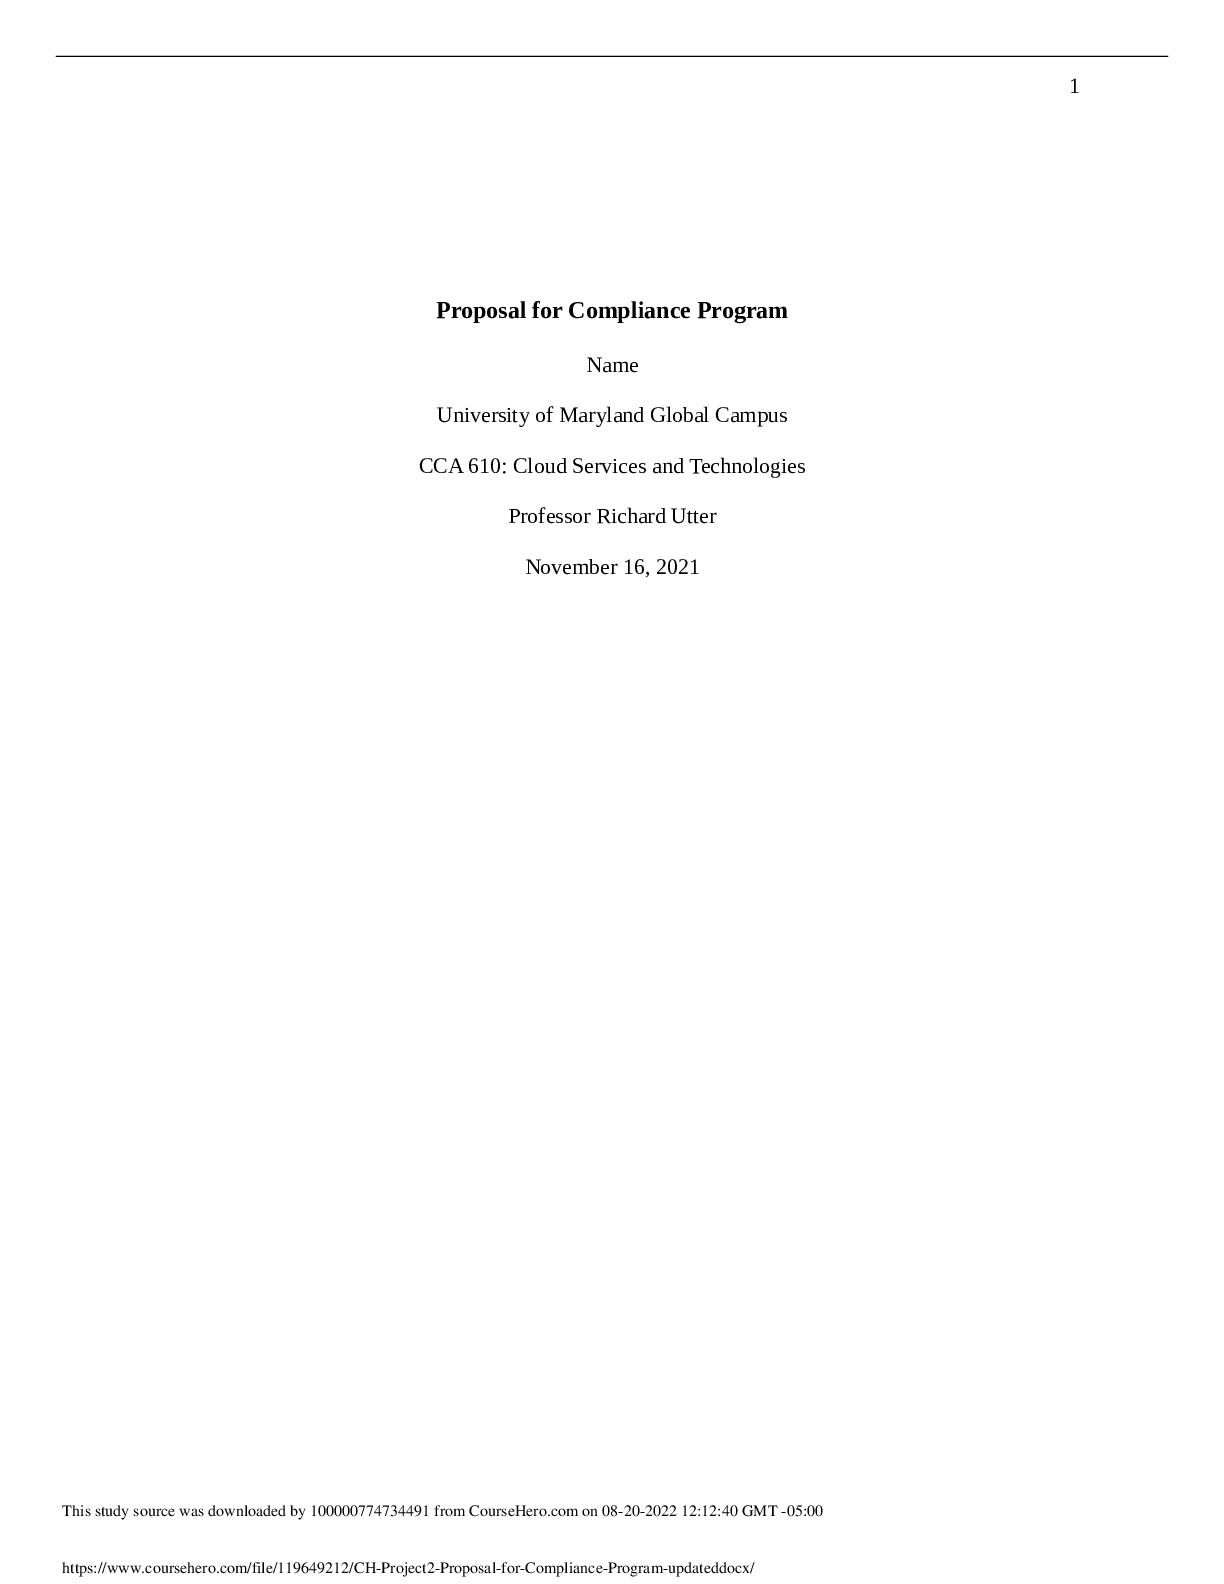 CH_Project2_Proposal_for_Compliance_Program_updated.docx